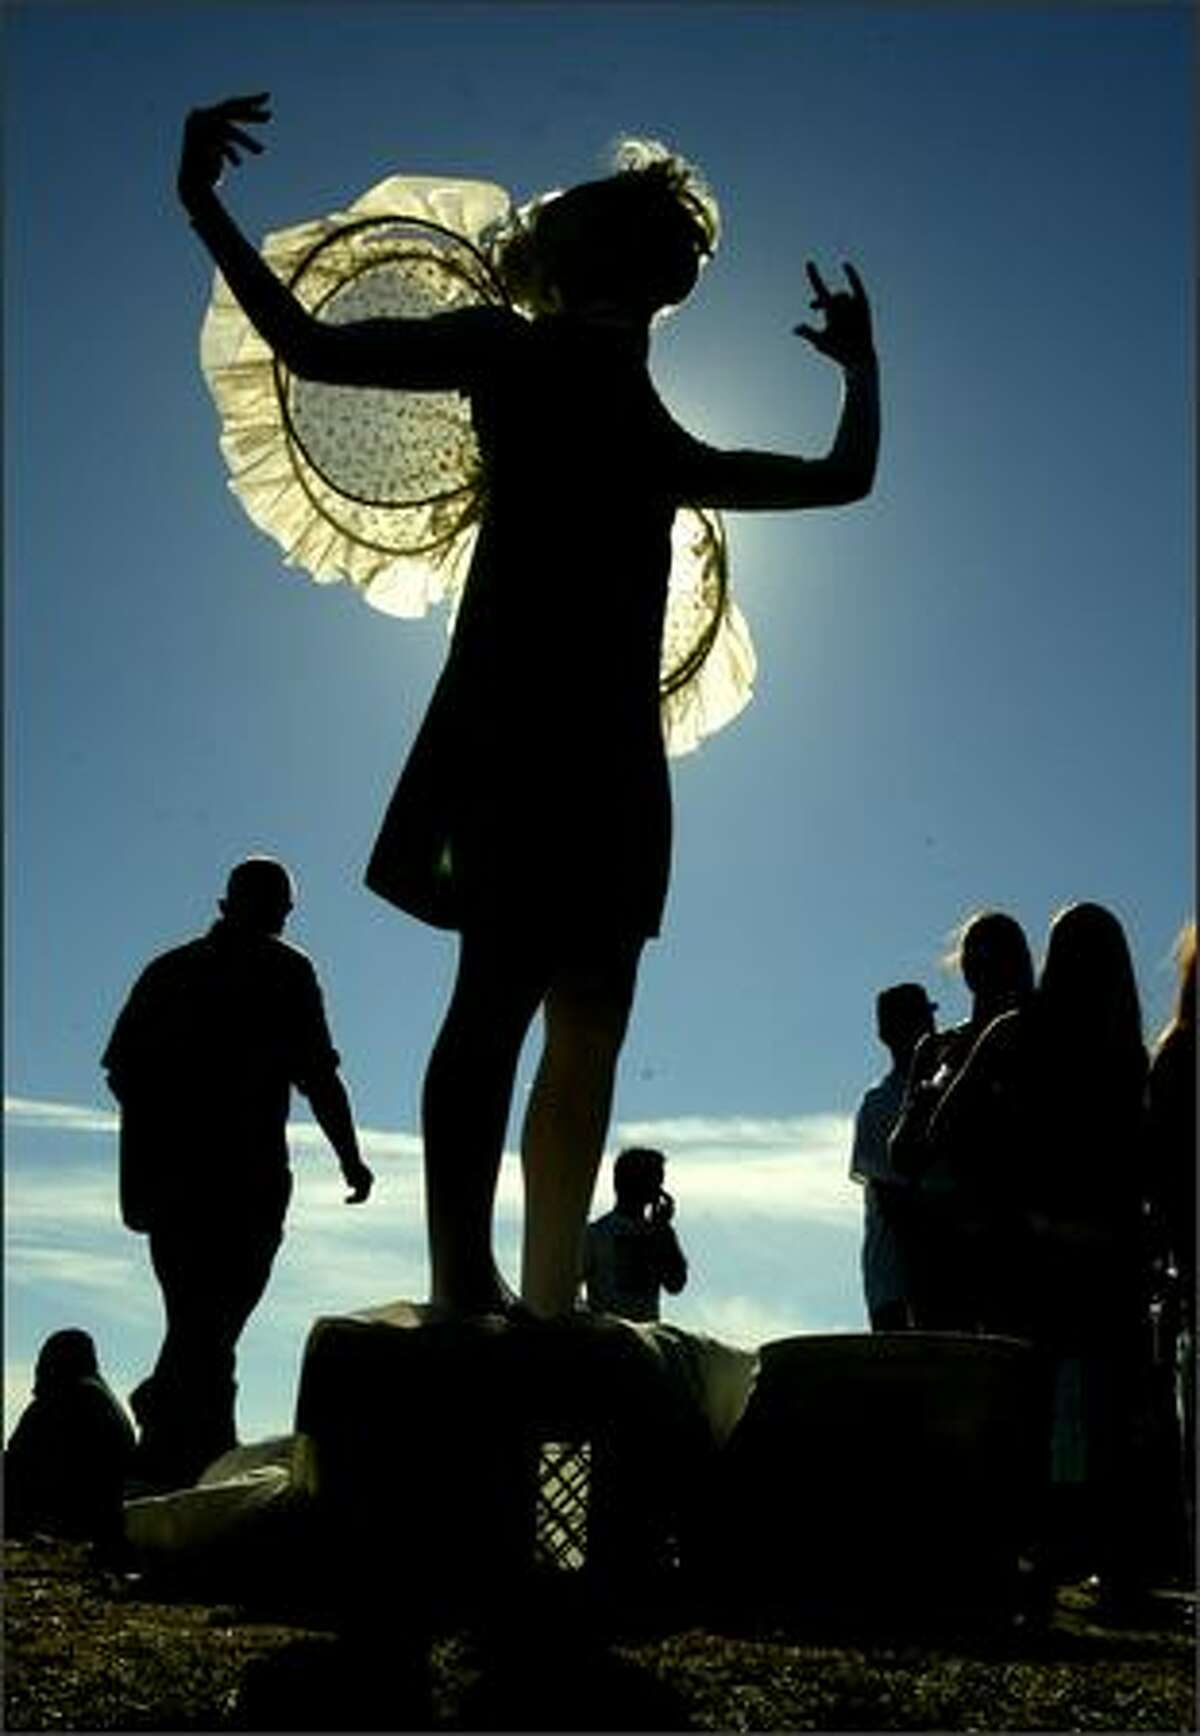 Performance artist Sheri Brown strikes a pose as a human sculpture for spectators attending the 15th annual Hempfest at Myrtle Edwards Park.